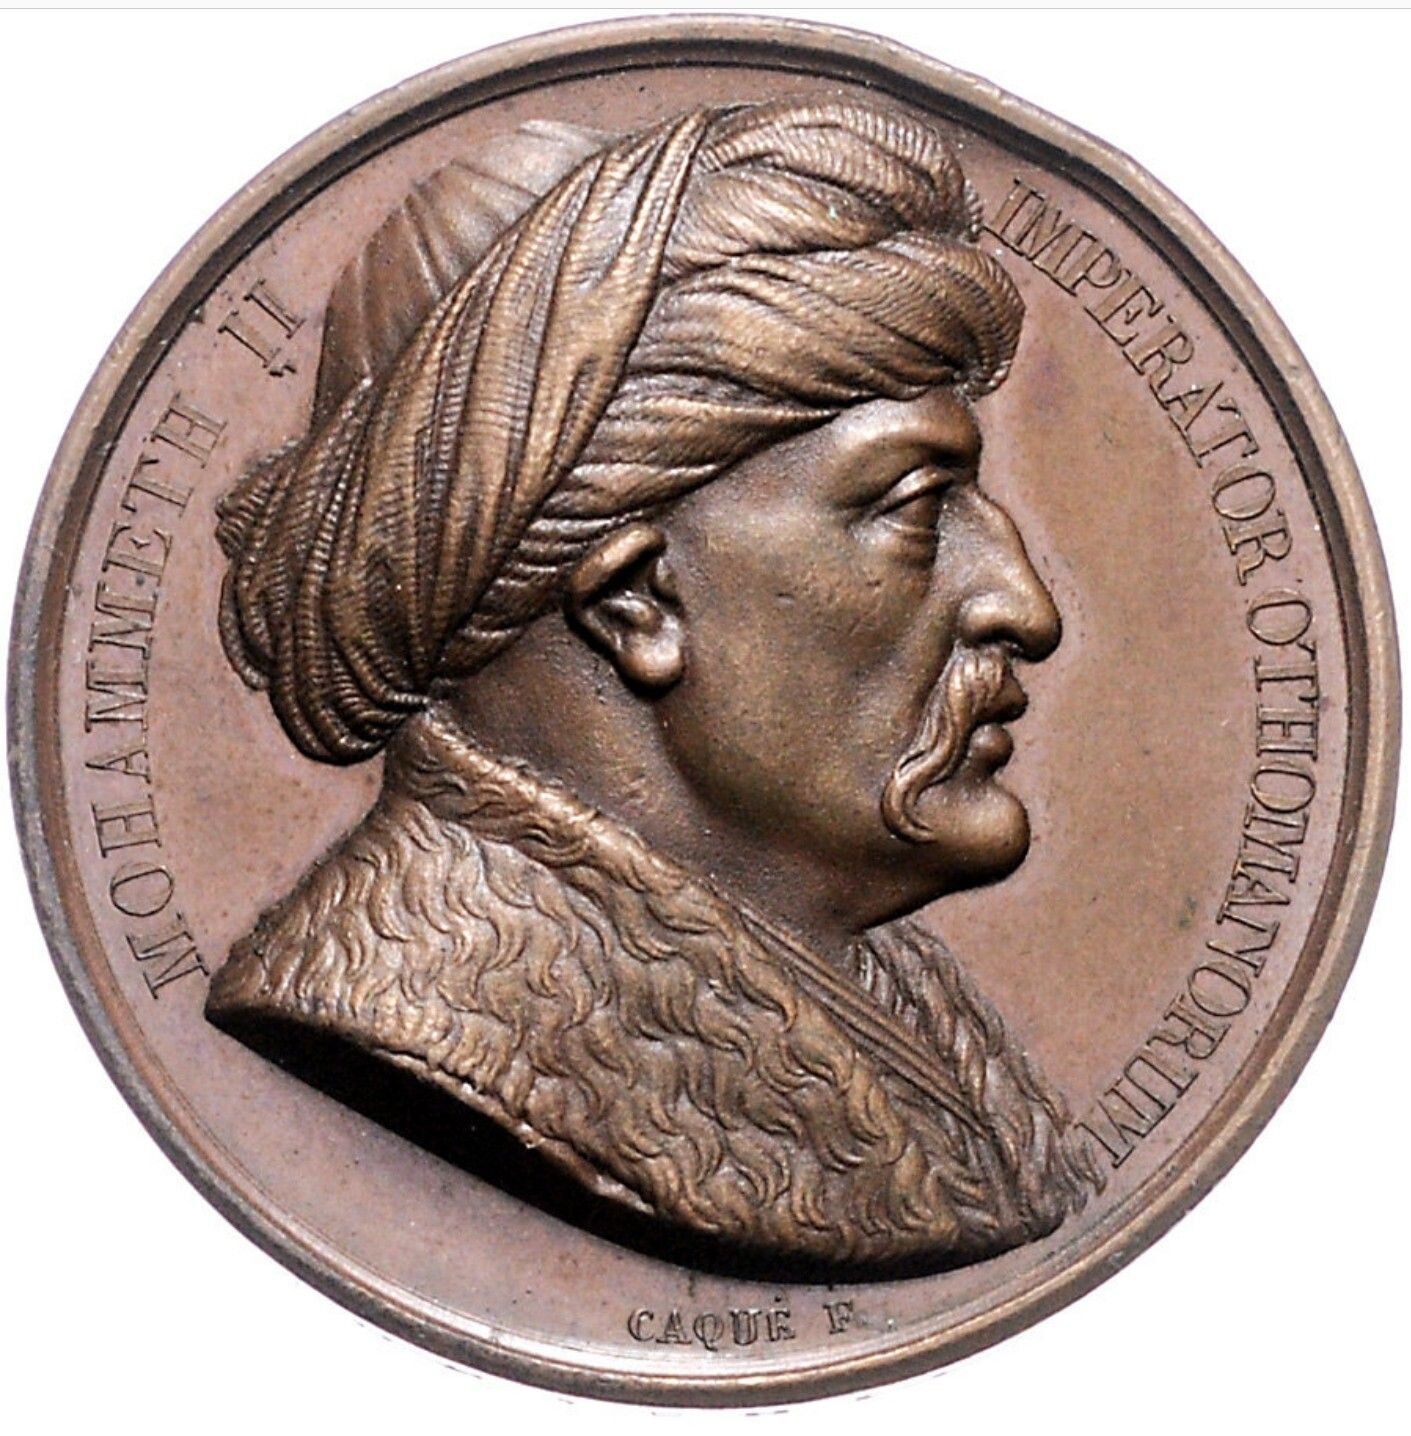 Picture of the original coin